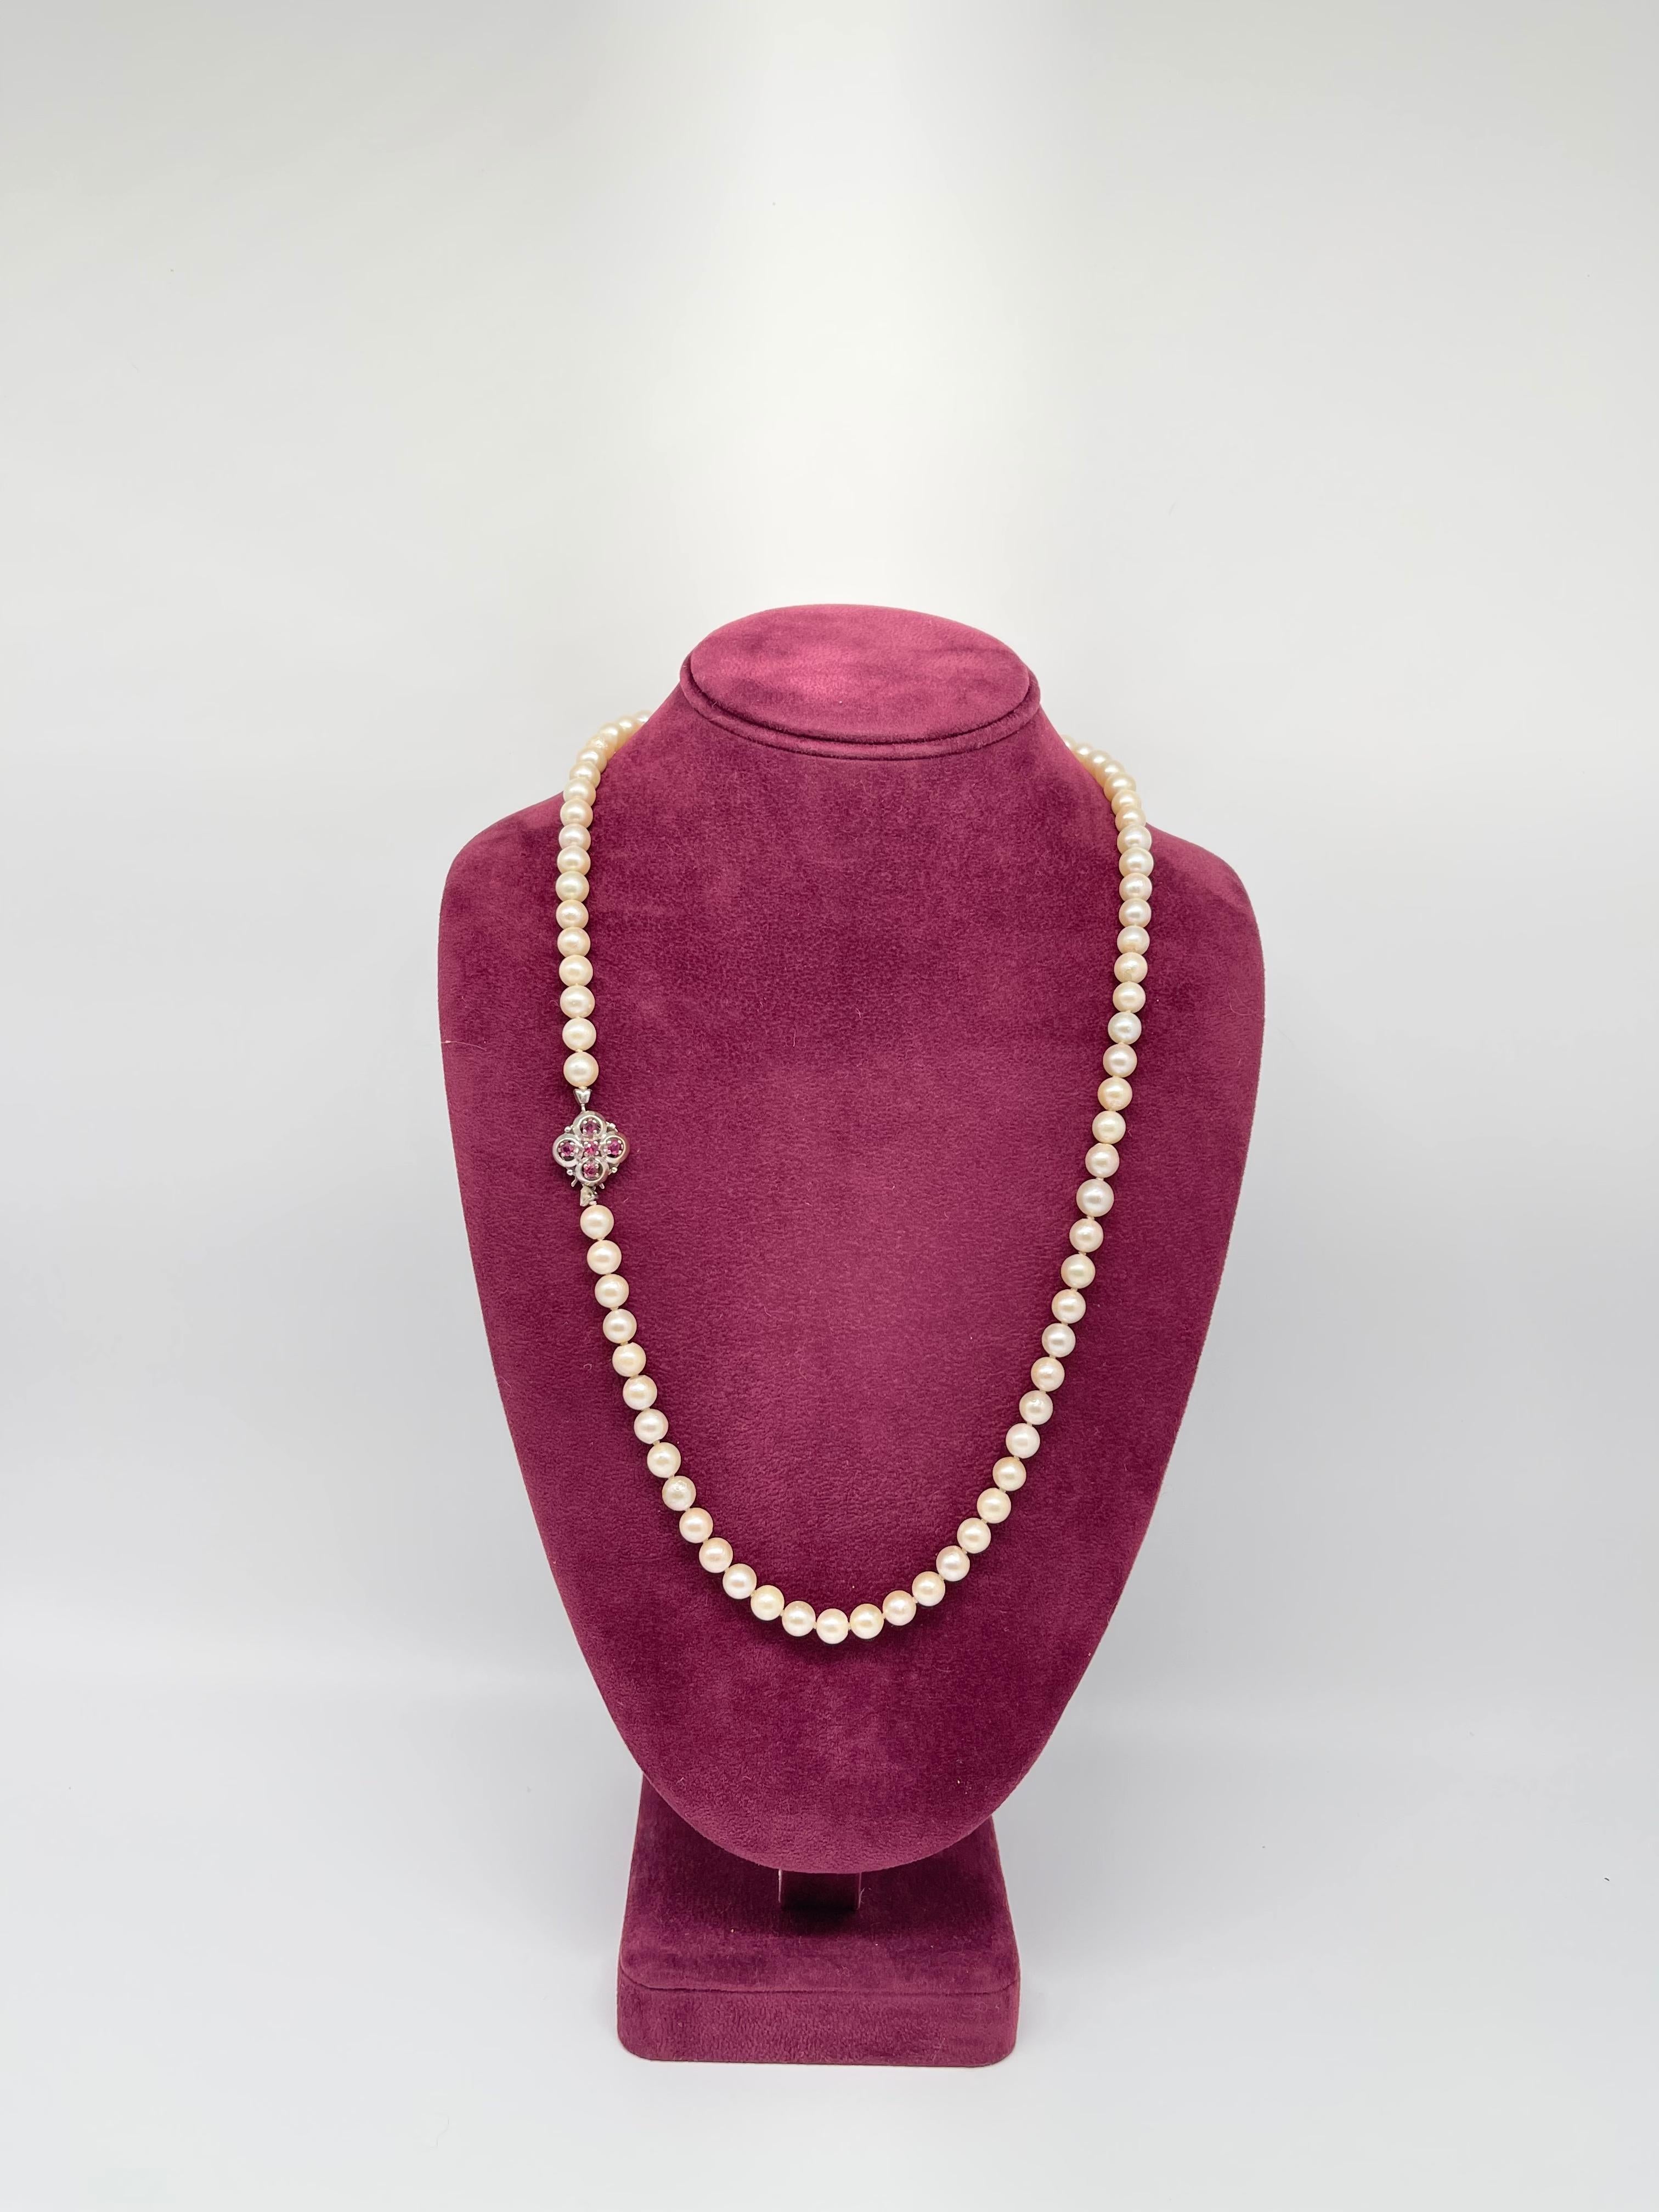 A Magnificent Necklace consisting of Akoya pearls with white gold clasp with 5 rubies in quatrefoil shape

80 Akoya pearls of approx. Ø 7 mm

Natural white, lustre very good; with natural
growth features.

Total length: 45.5 cm length opened, 44 cm